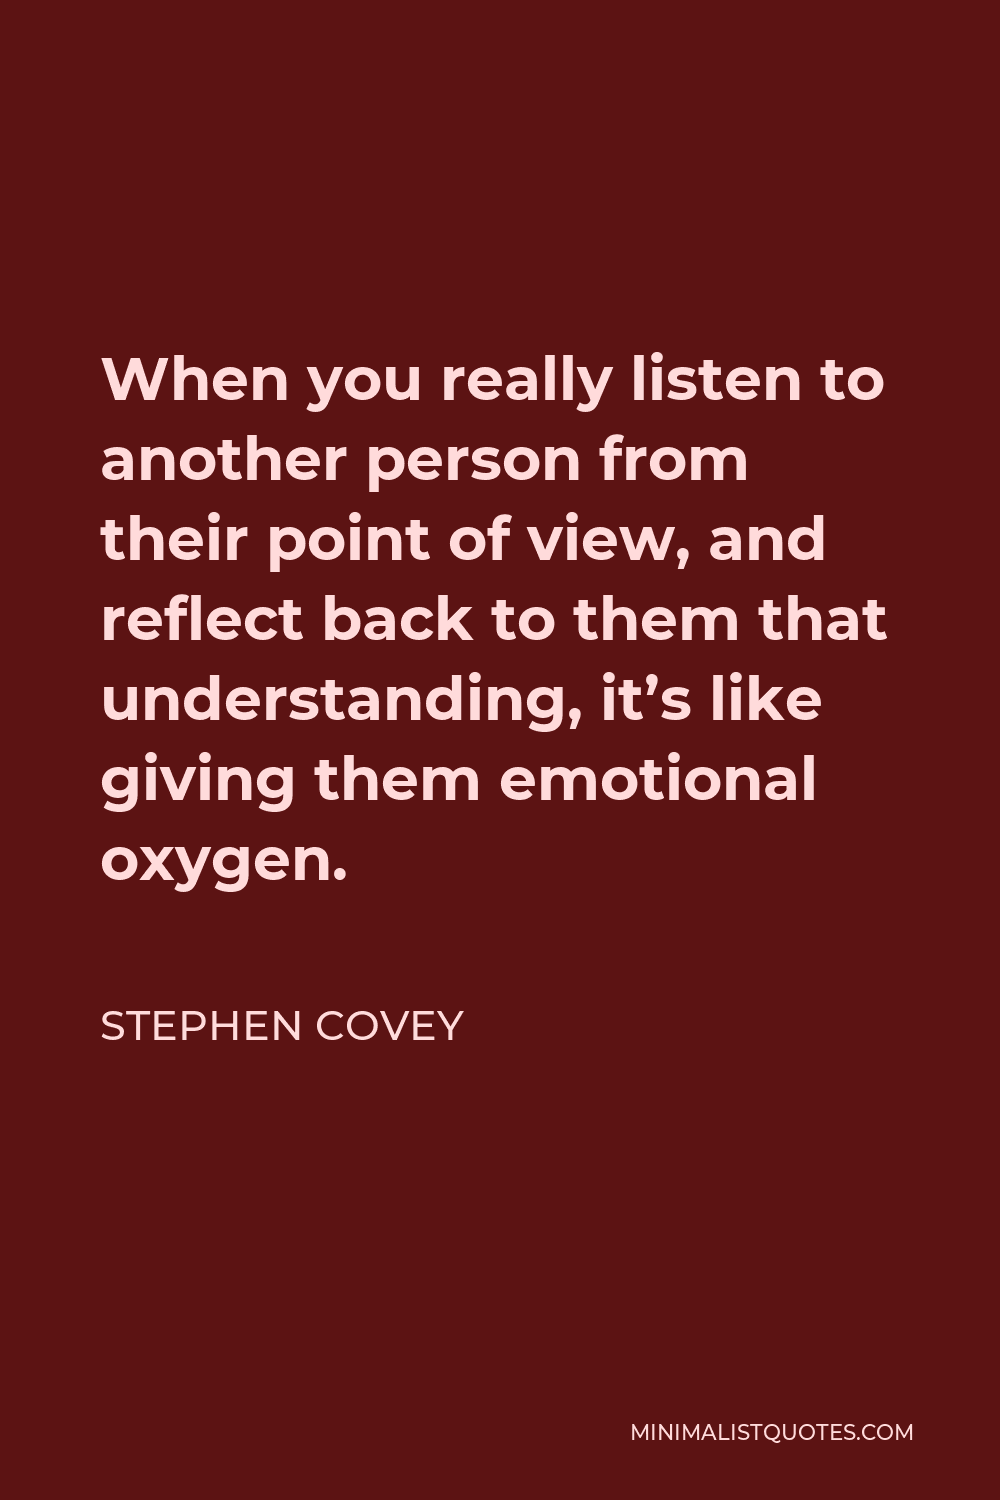 Stephen Covey Quote - When you really listen to another person from their point of view, and reflect back to them that understanding, it’s like giving them emotional oxygen.